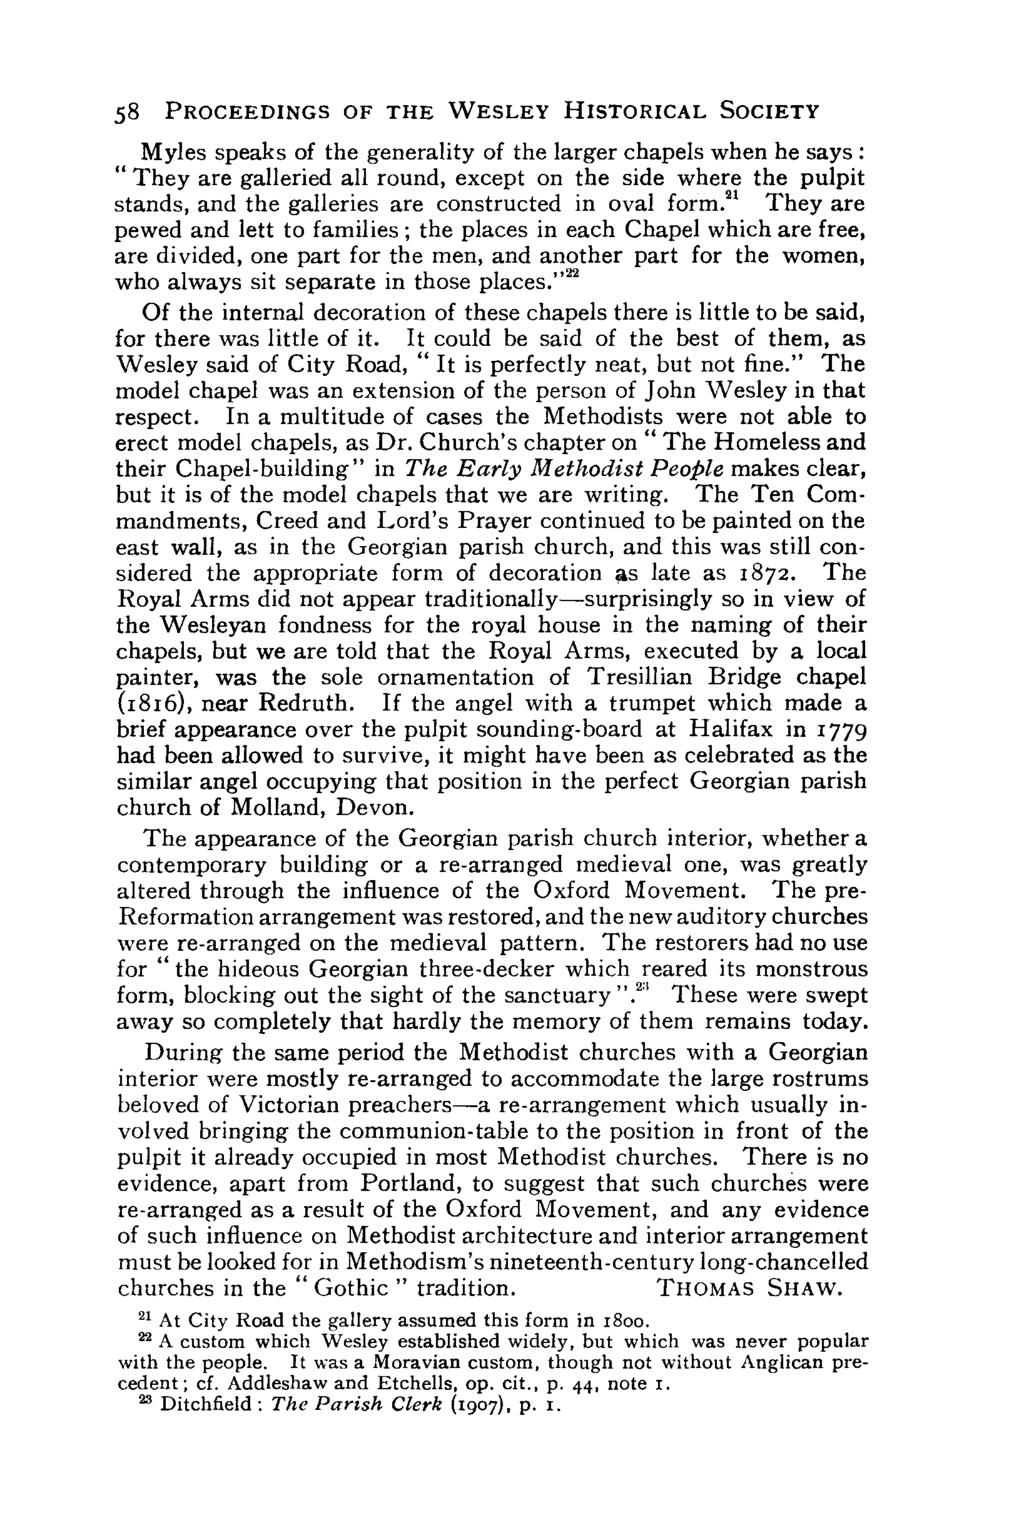 58 PROCEEDINGS OF THE WESLEY HISTORICAL SOCIETY Myles speaks of the generality of the larger chapels when he says: " They are galleried all round, except on the side where the pulpit stands, and the